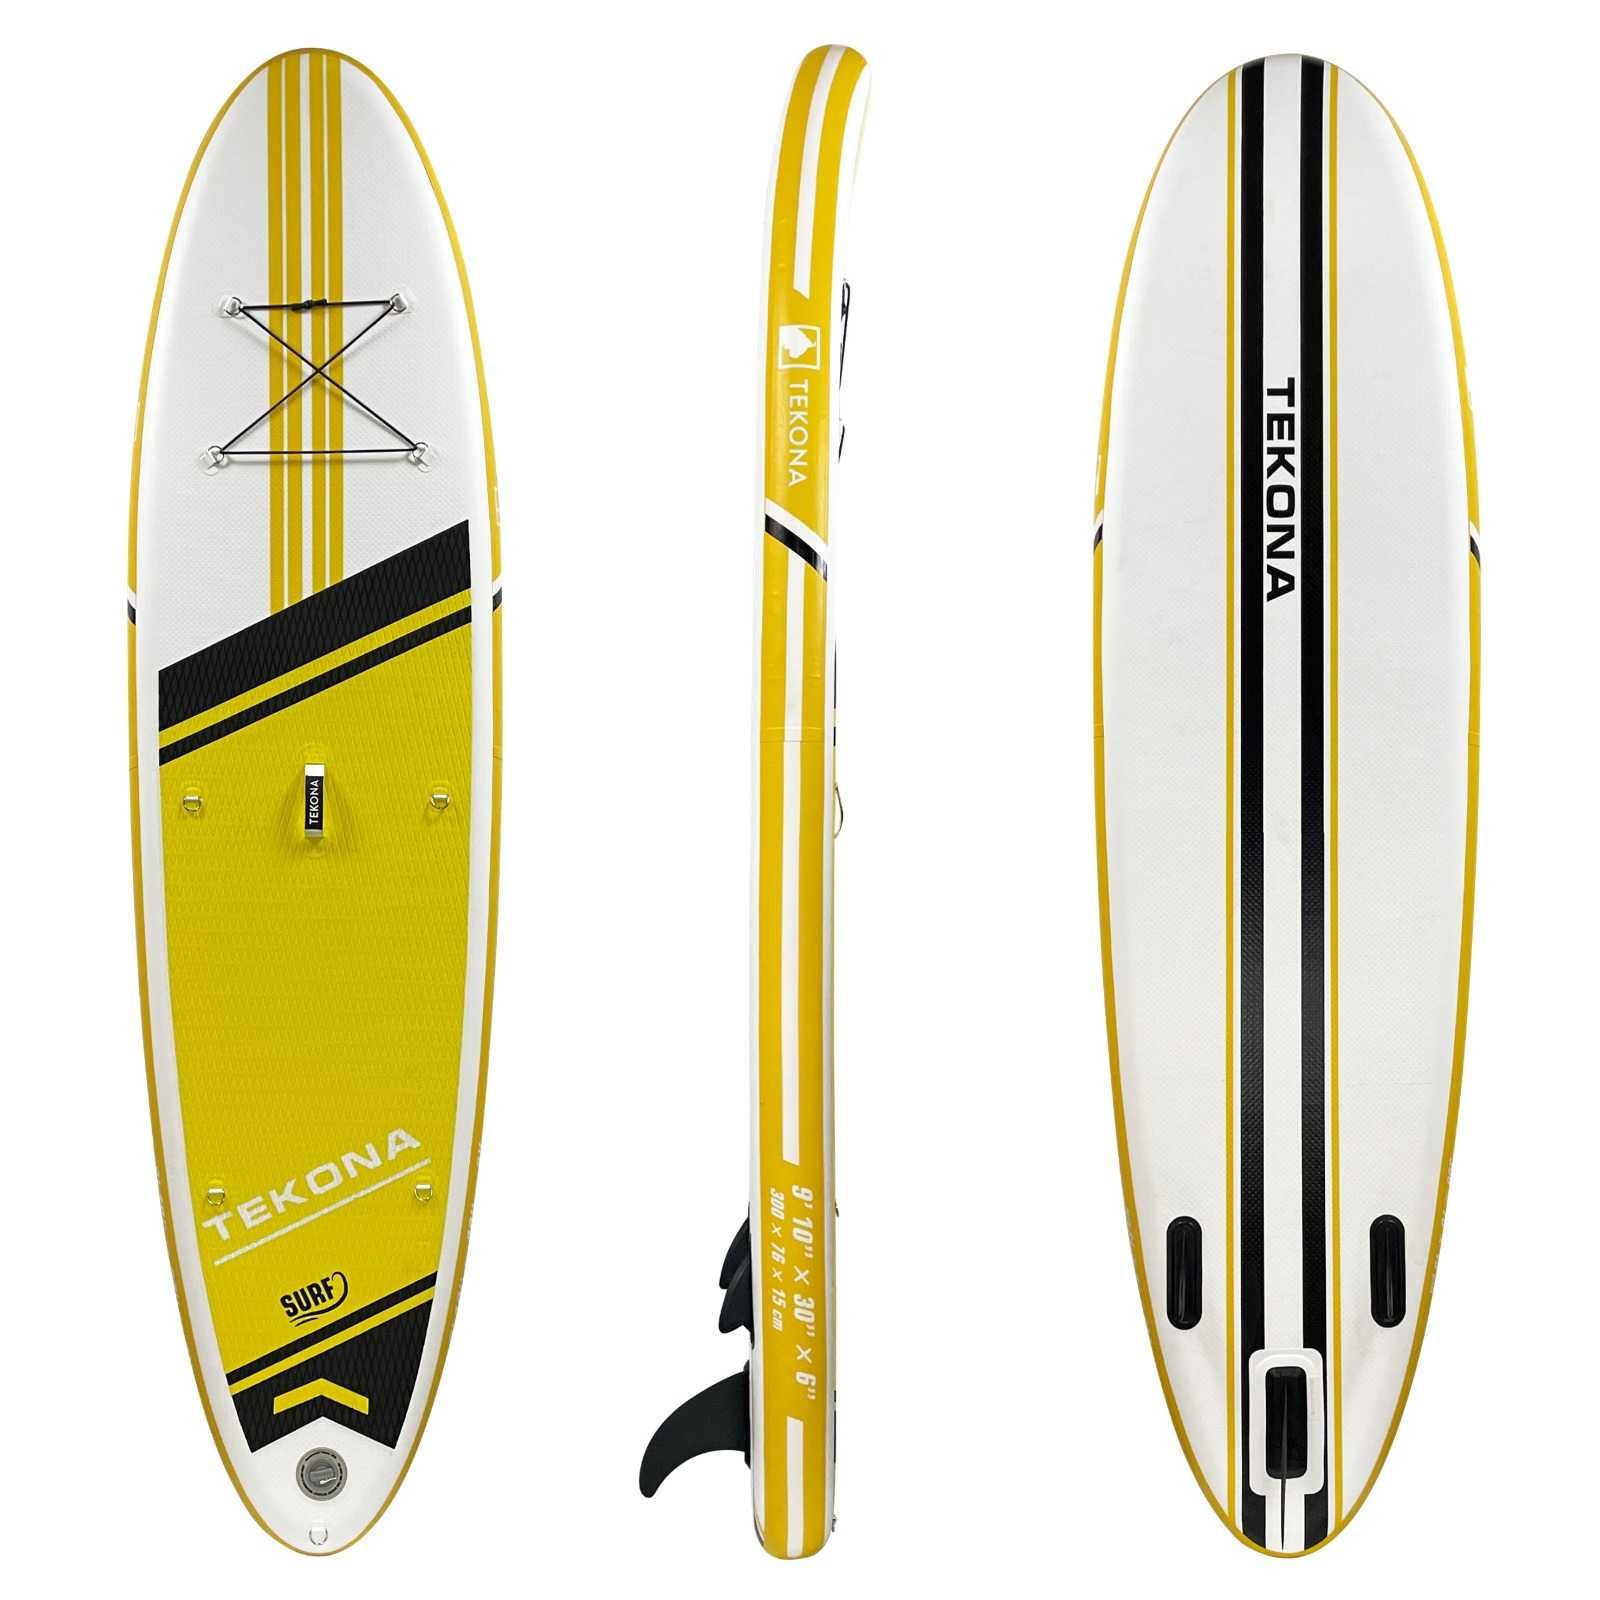 SUP дошка 300 см САП доска НОВАЯ борд TEKONA Stand Up Paddle Board Set